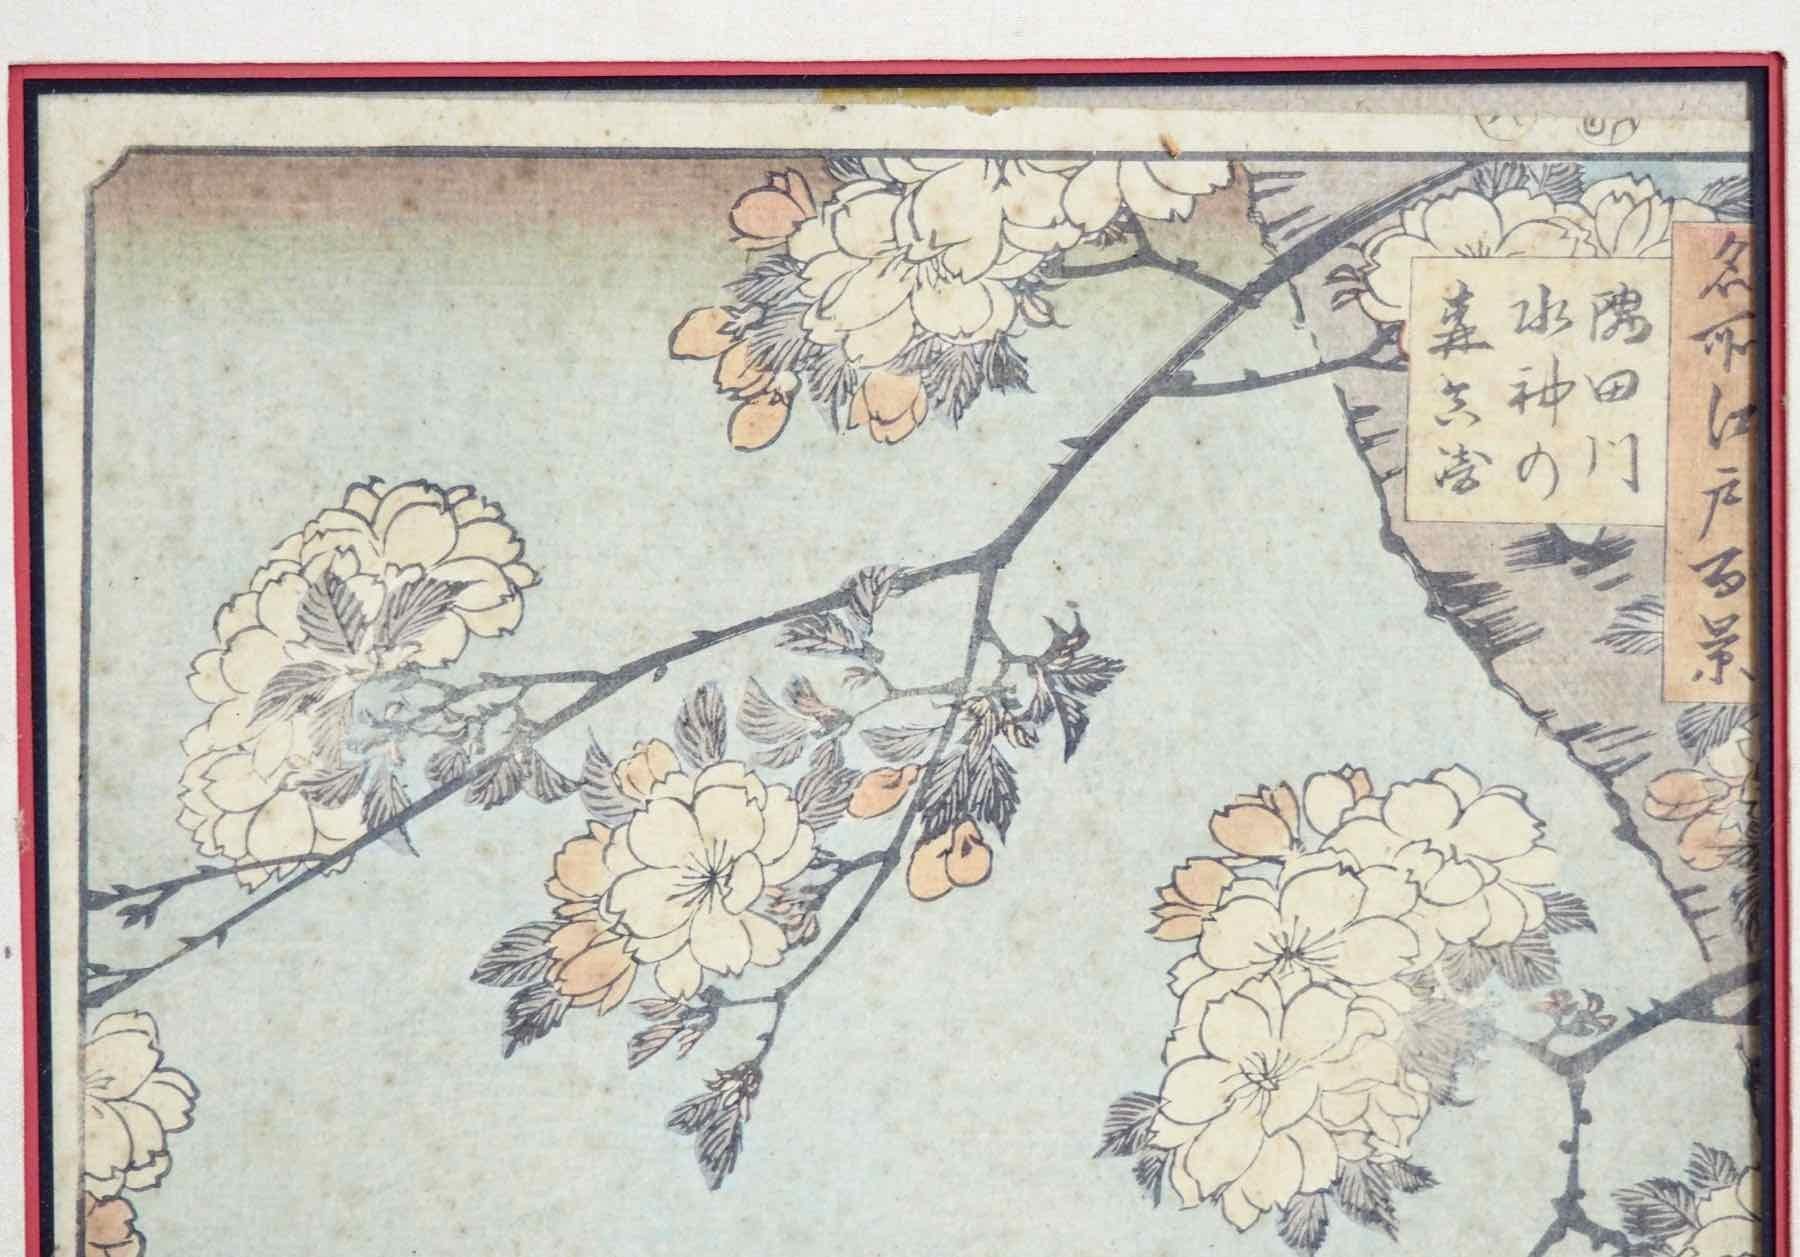 Hiroshigé woodcut, view to Edo in the spring, 19th century
Inner measurements:
H. 33, W. 22 cm.
H. 12.9, W. 8.6 in.